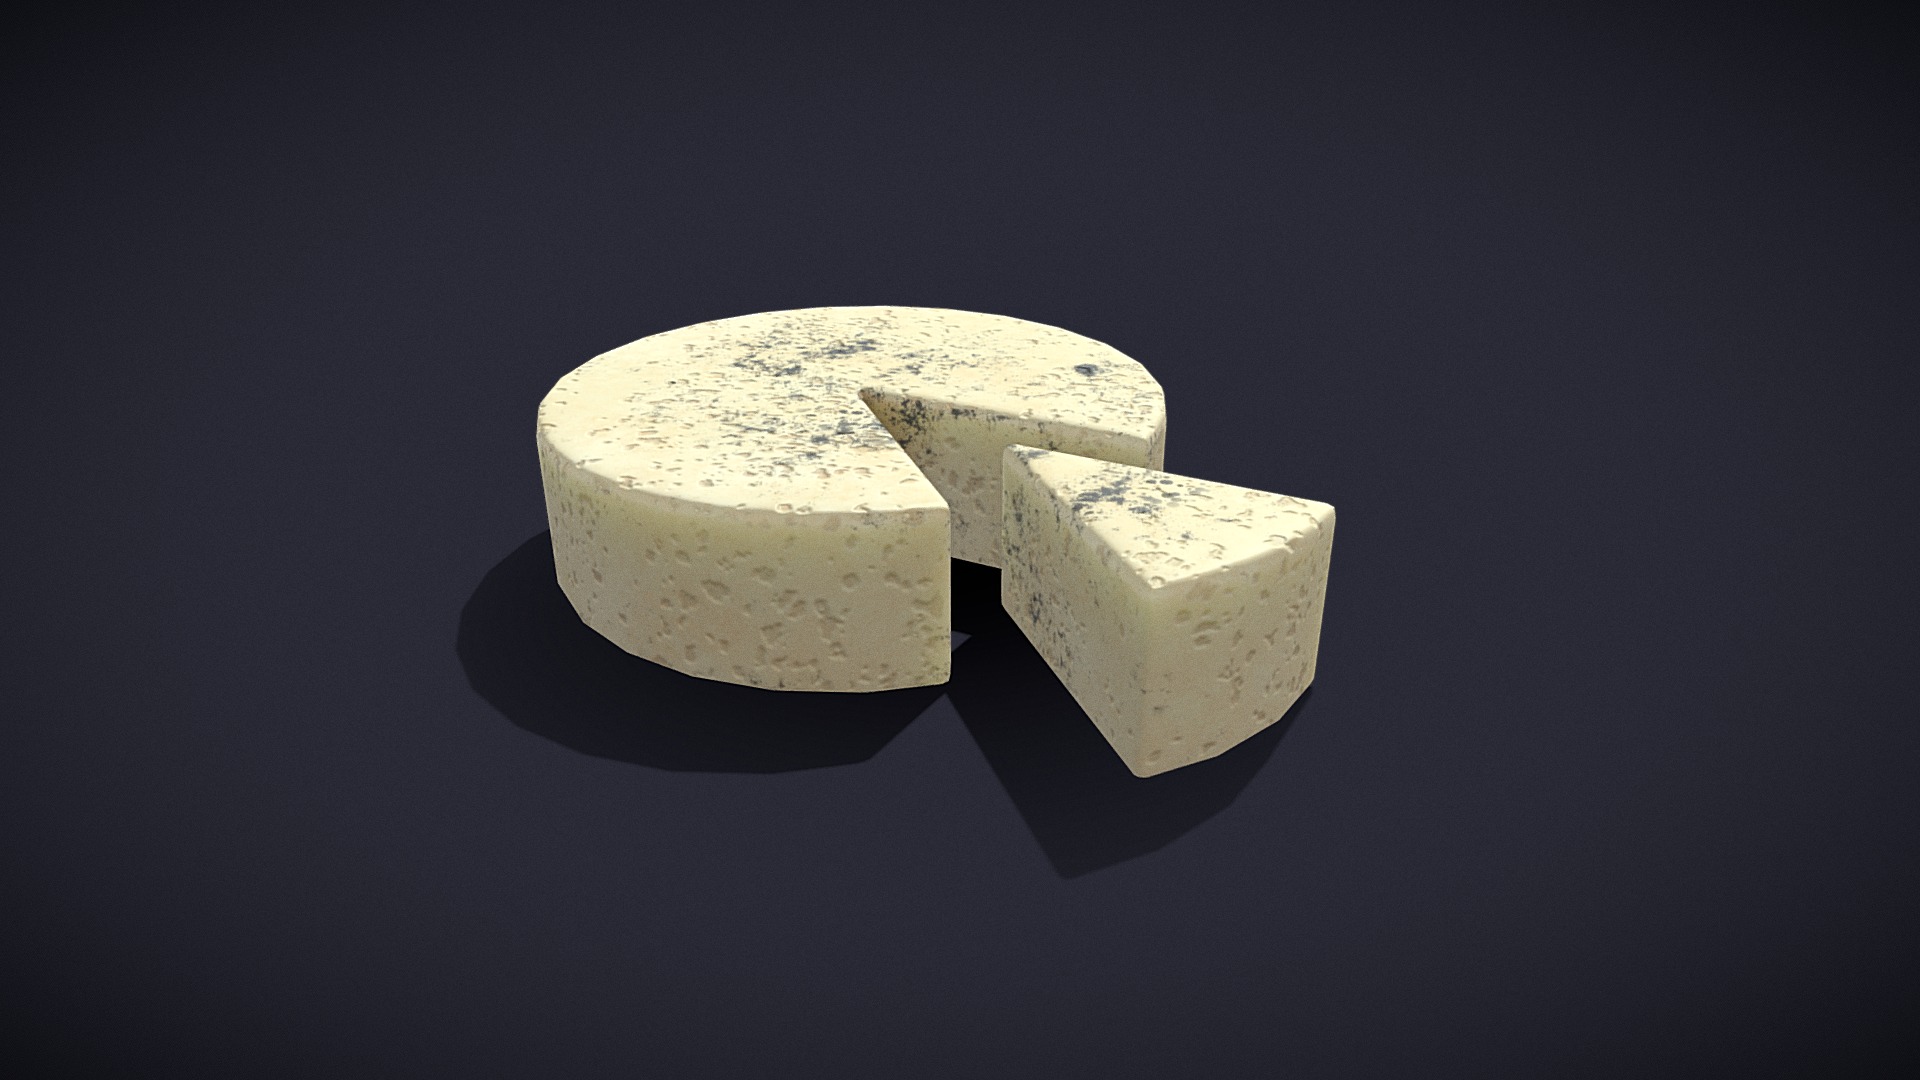 3D model Gorgonzola Cheese FBX - This is a 3D model of the Gorgonzola Cheese FBX. The 3D model is about a stack of white stones.